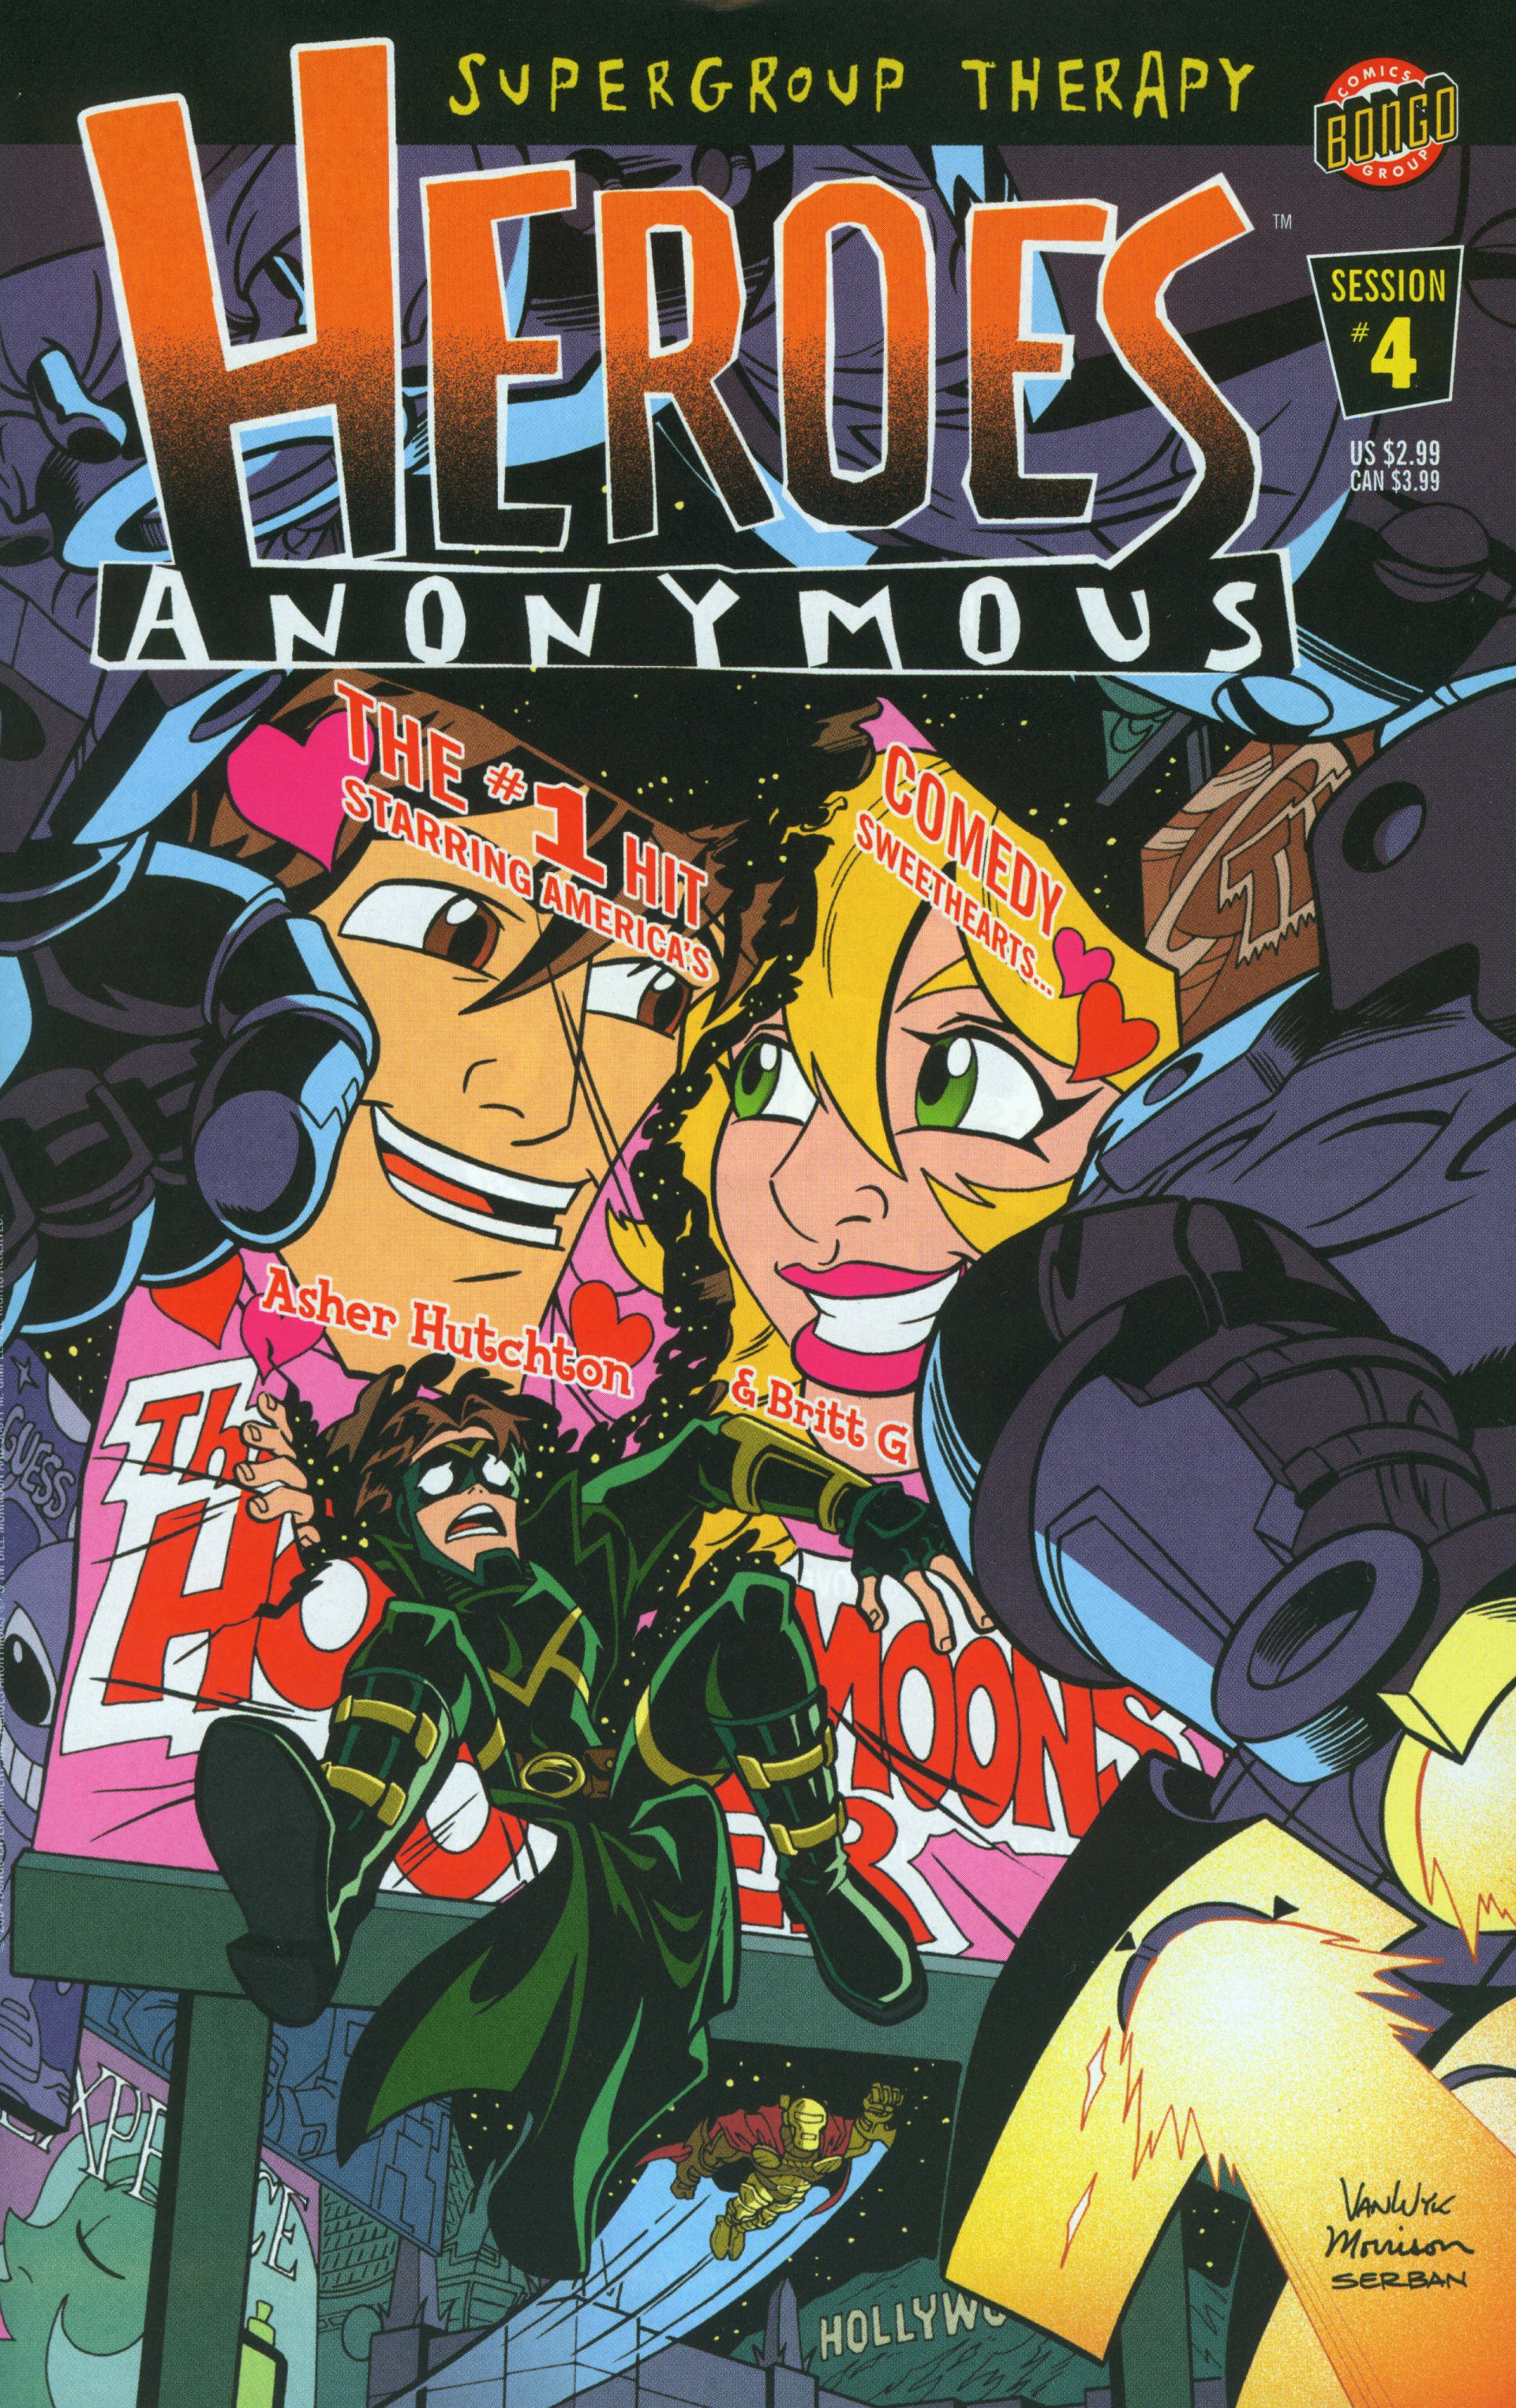 Read online Heroes Anonymous comic -  Issue #4 - 1